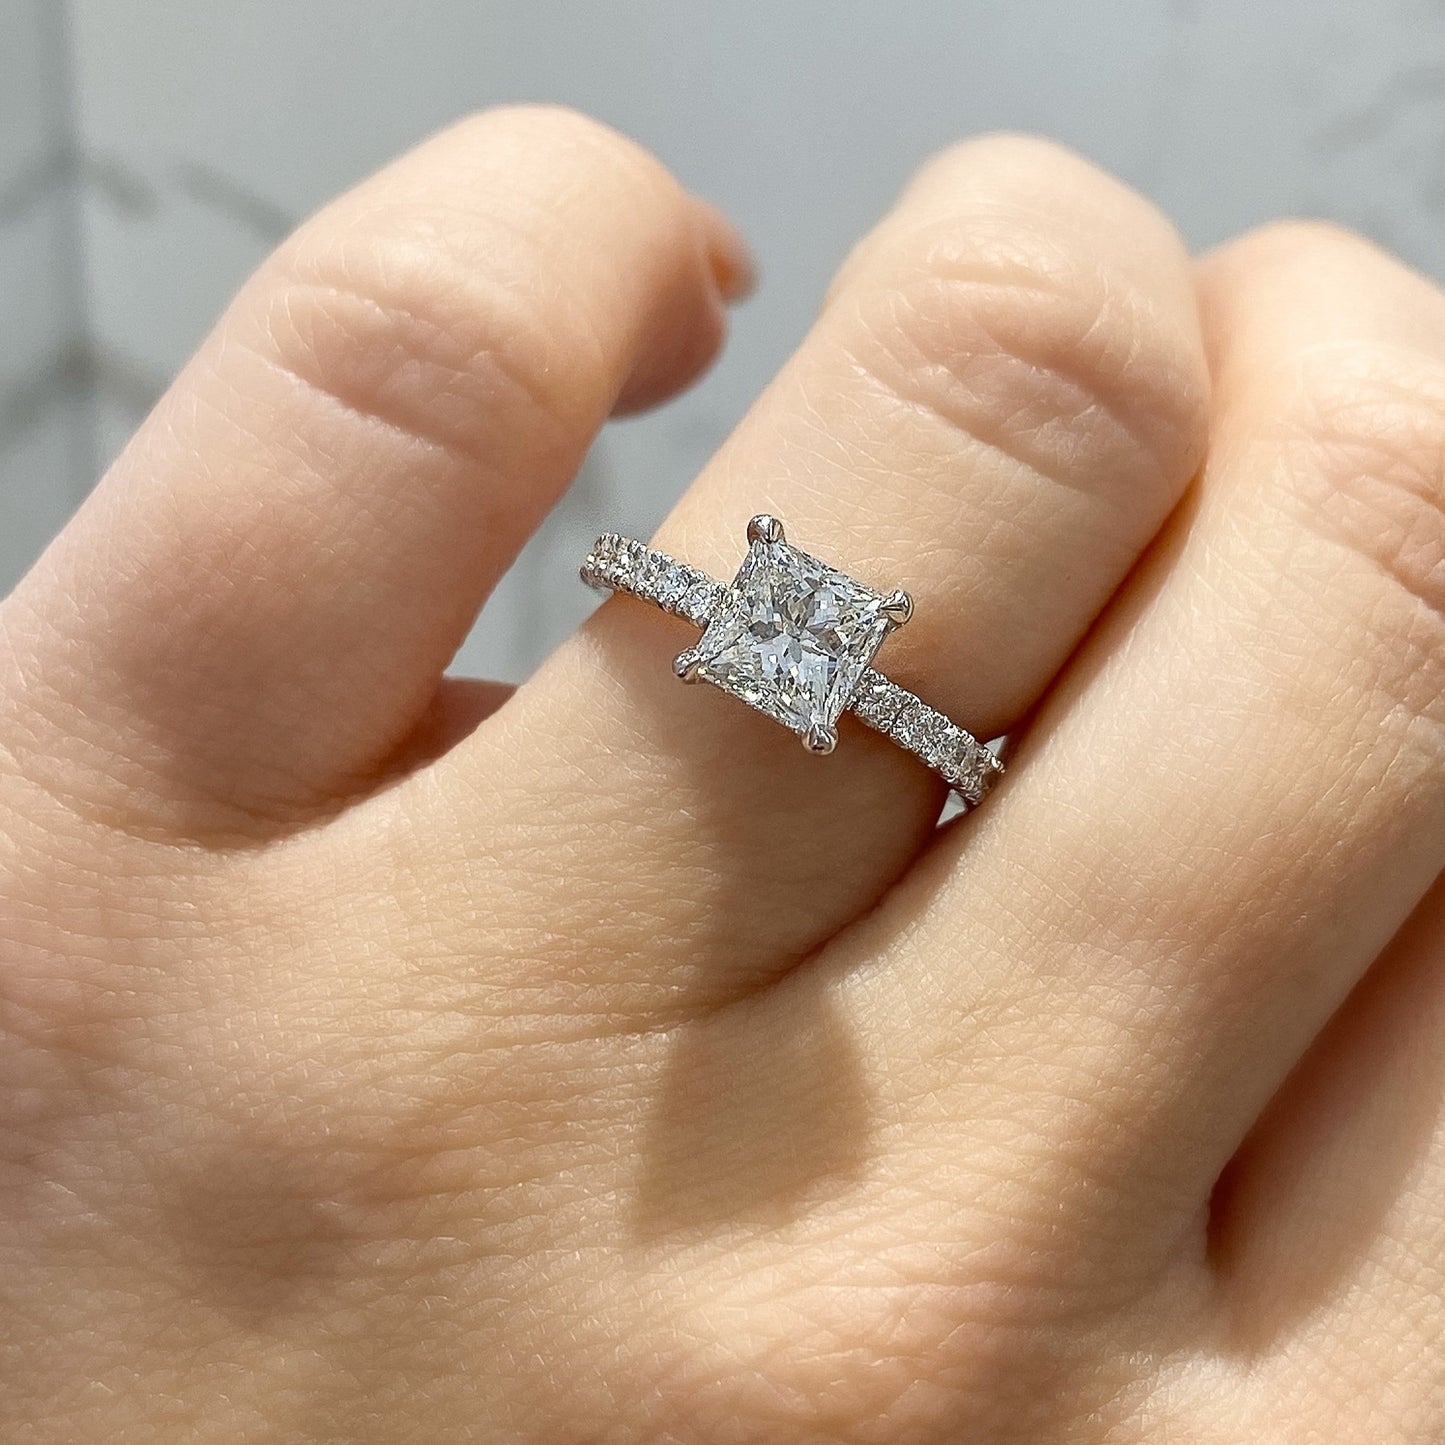 Load image into Gallery viewer, Engagement Ring 1.01 Princess Cut Diamond - Happy Jewelers Fine Jewelry Lifetime Warranty
